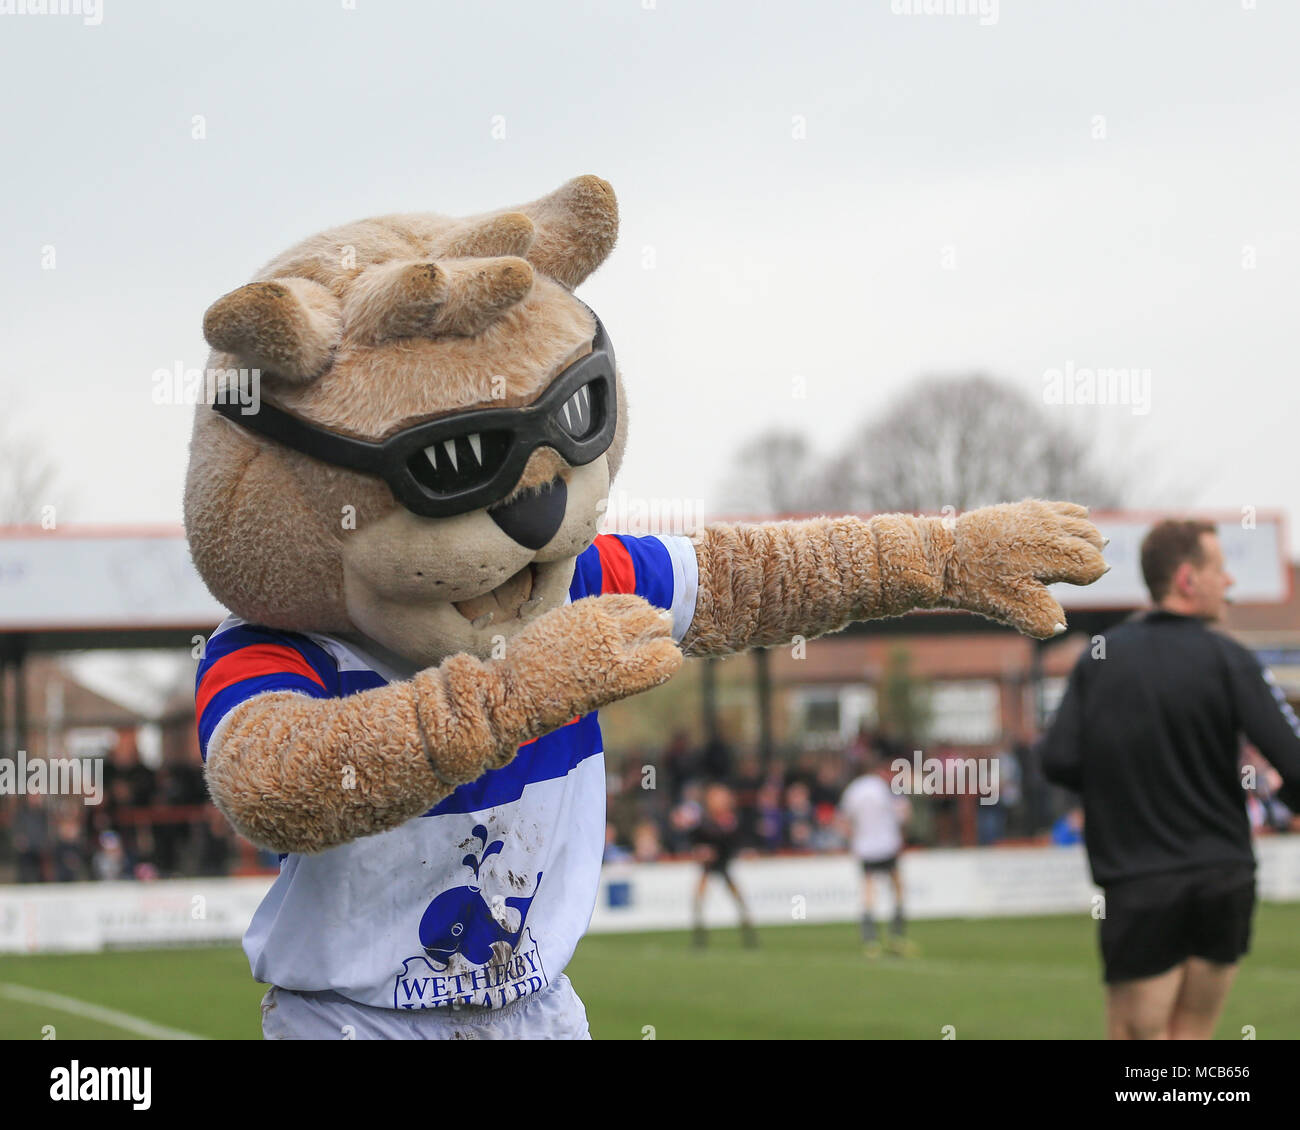 Wakefield, UK 15 Avril 2018Betfred Super League rugby, Wakefield Trinity v St Helens ; Daddy Cool Wakefield Trinity de crystalxp pour tamponner la foule Credit : Nouvelles Images/Alamy Live News Crédit : Nouvelles Images/Alamy Live News Banque D'Images